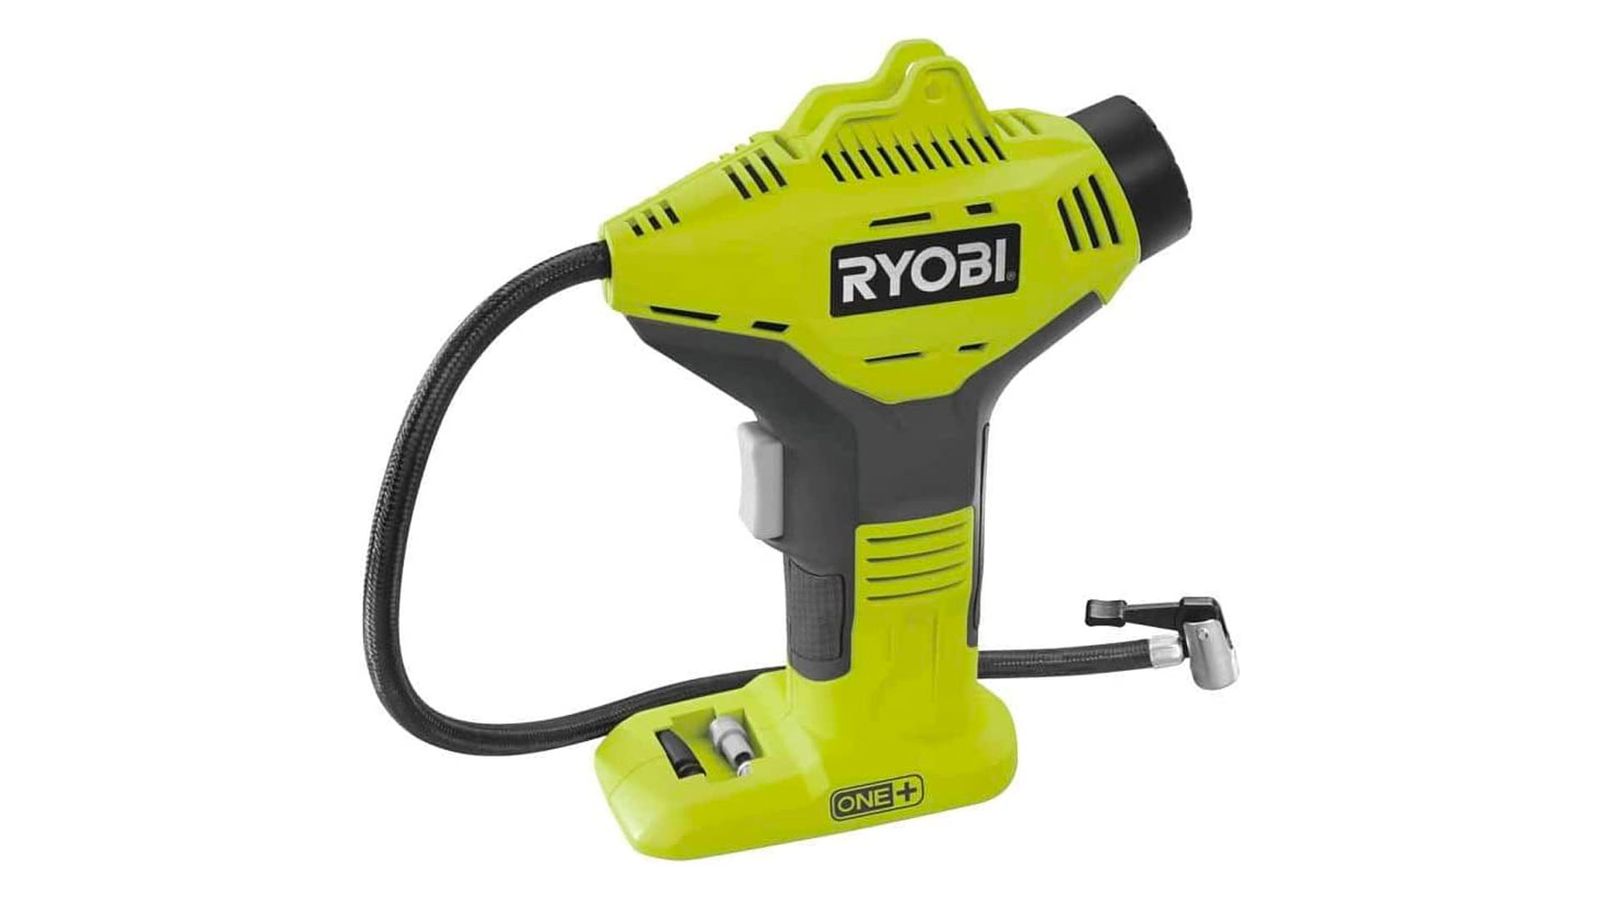 Ryobi R18PI-0 High Pressure Inflator product image of a light green and black machine with Ryobi branding on the side.